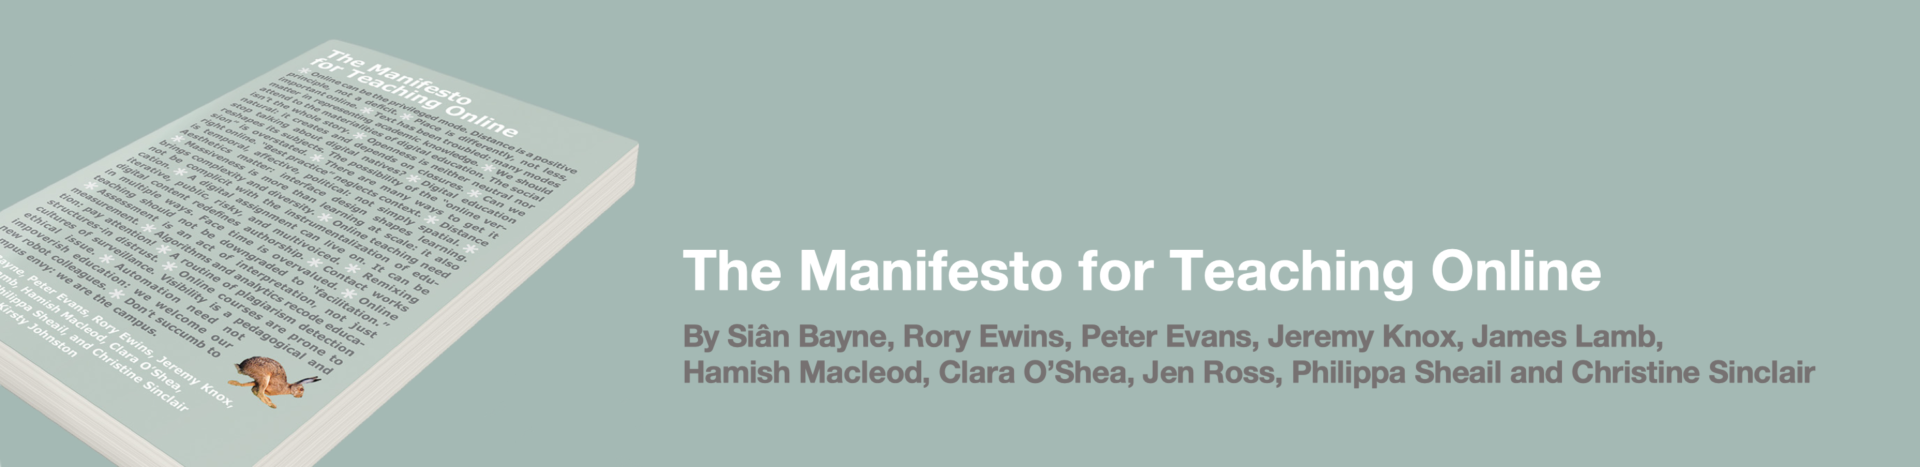 What can the manifesto do?